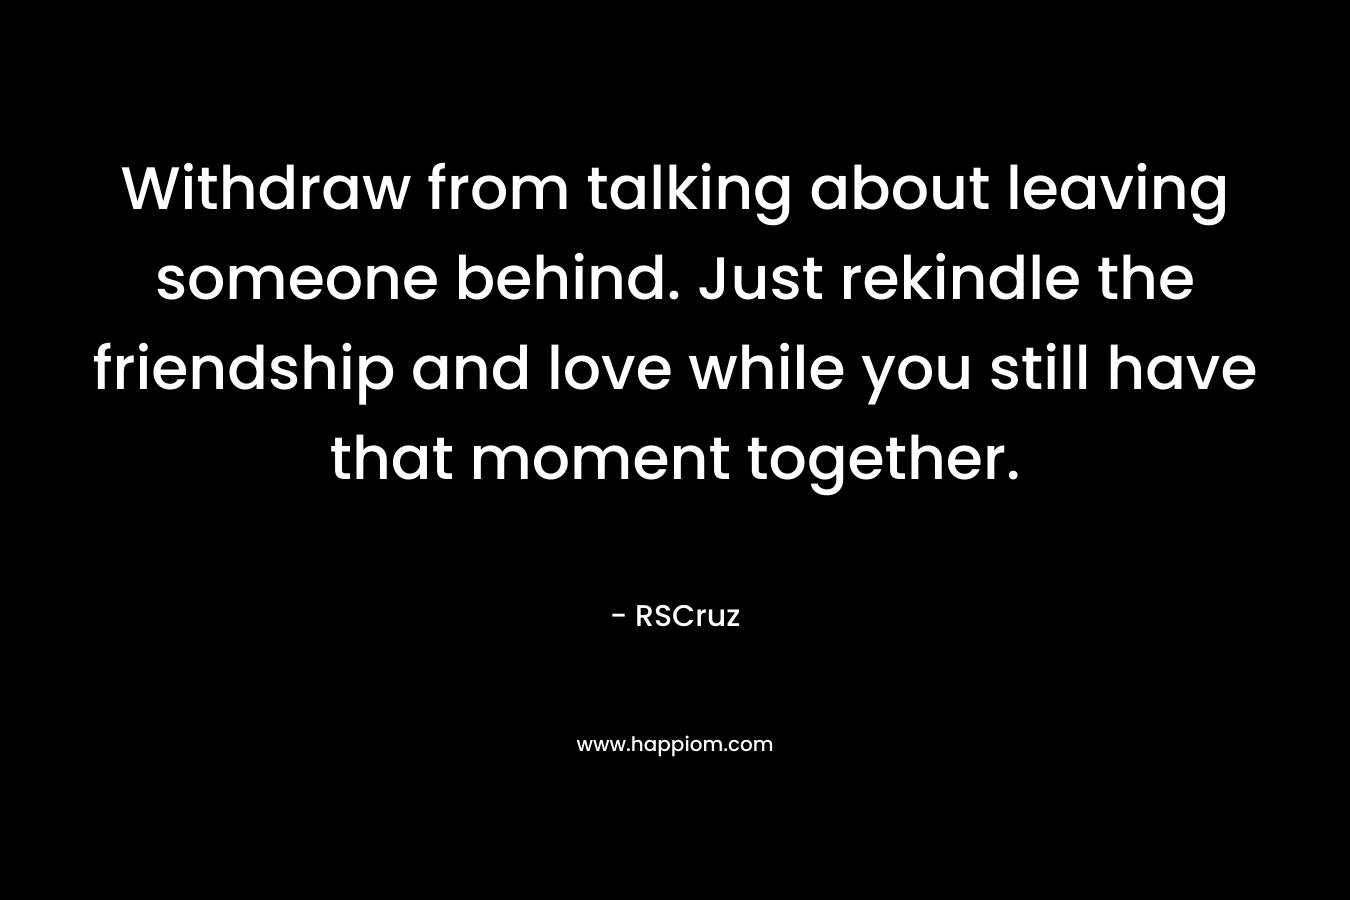 Withdraw from talking about leaving someone behind. Just rekindle the friendship and love while you still have that moment together. – RSCruz